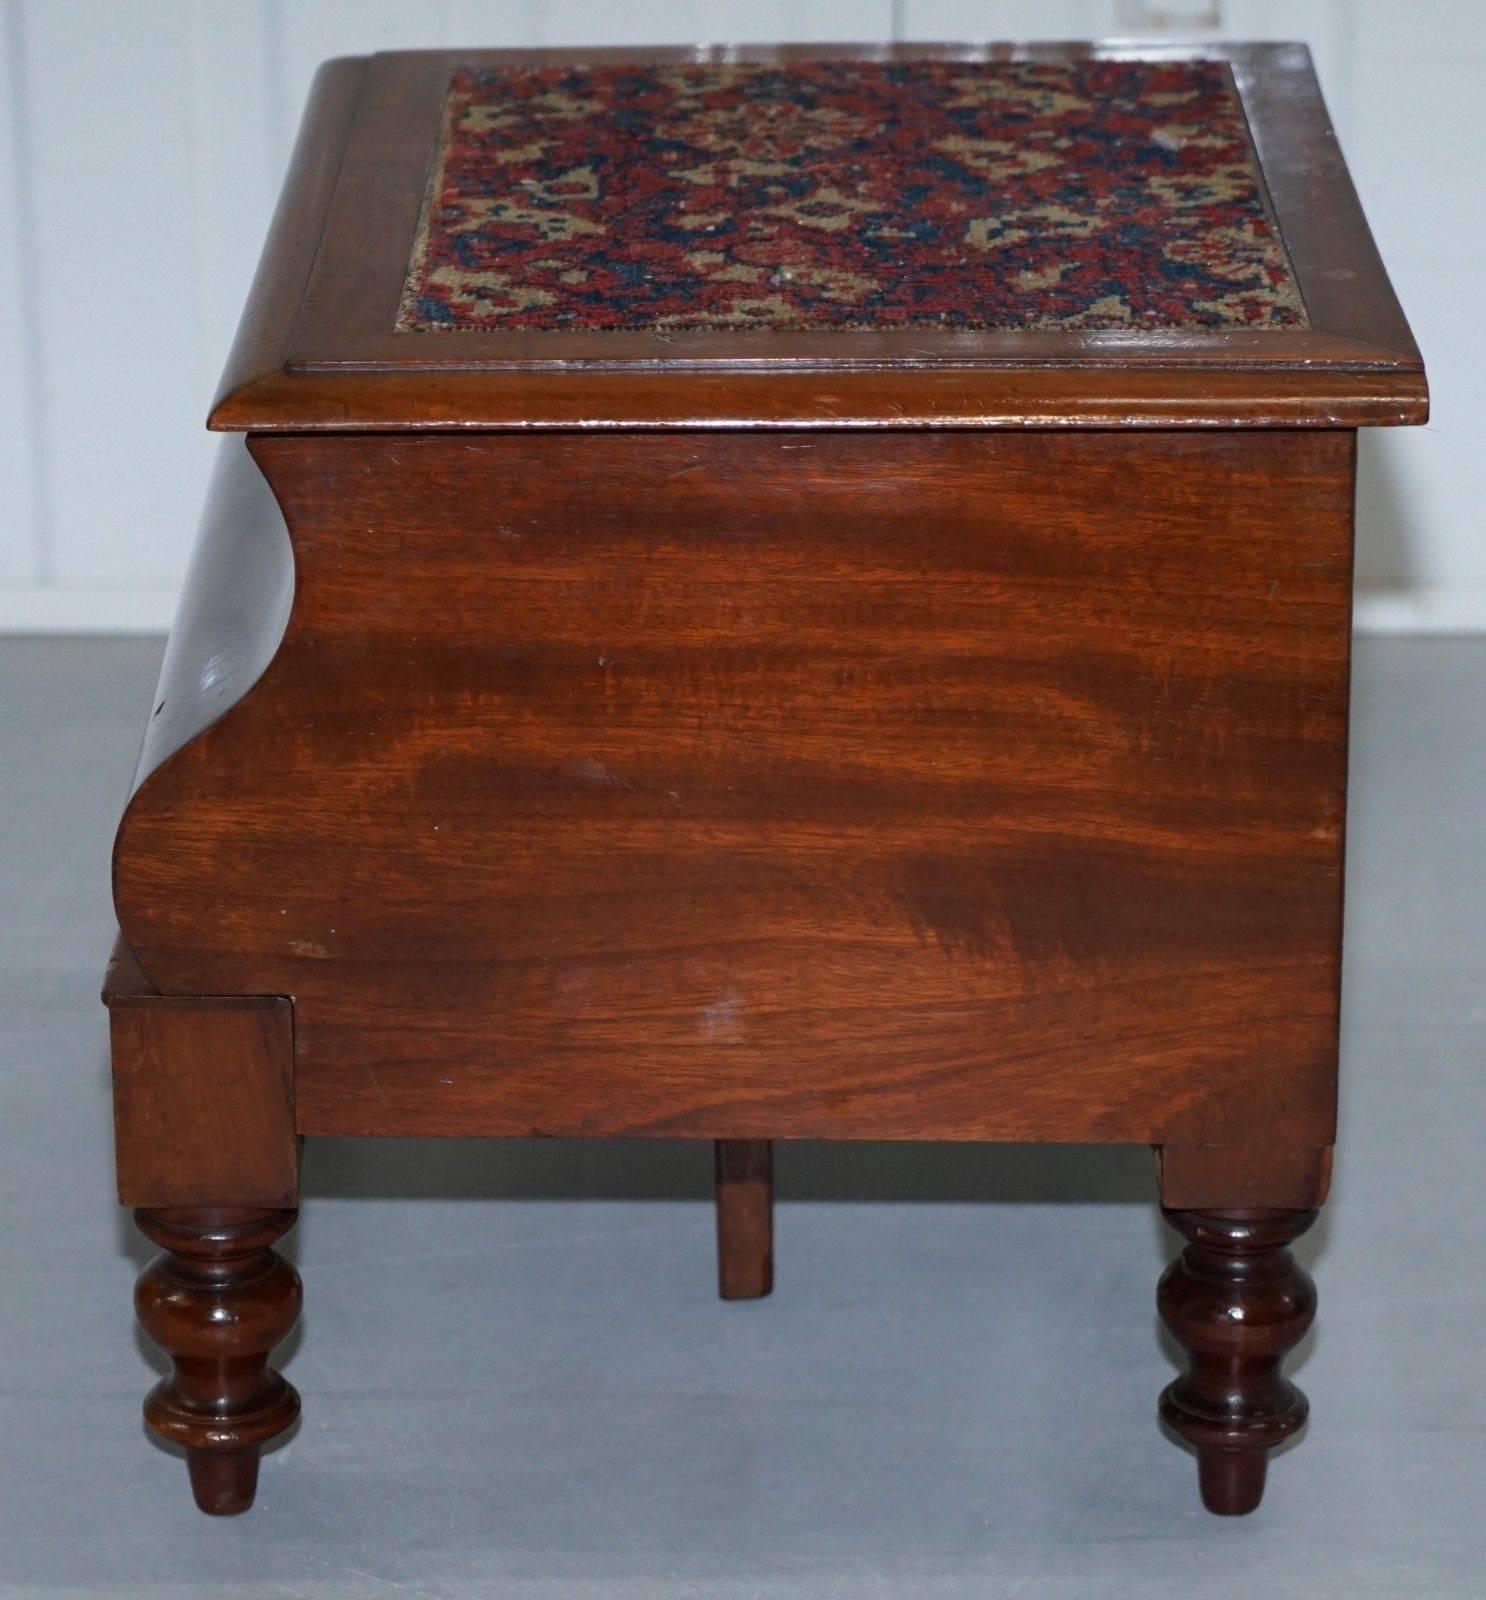 British Rare Fully Complete Victorian American Bed Step Stool with Built in Chamber Pot